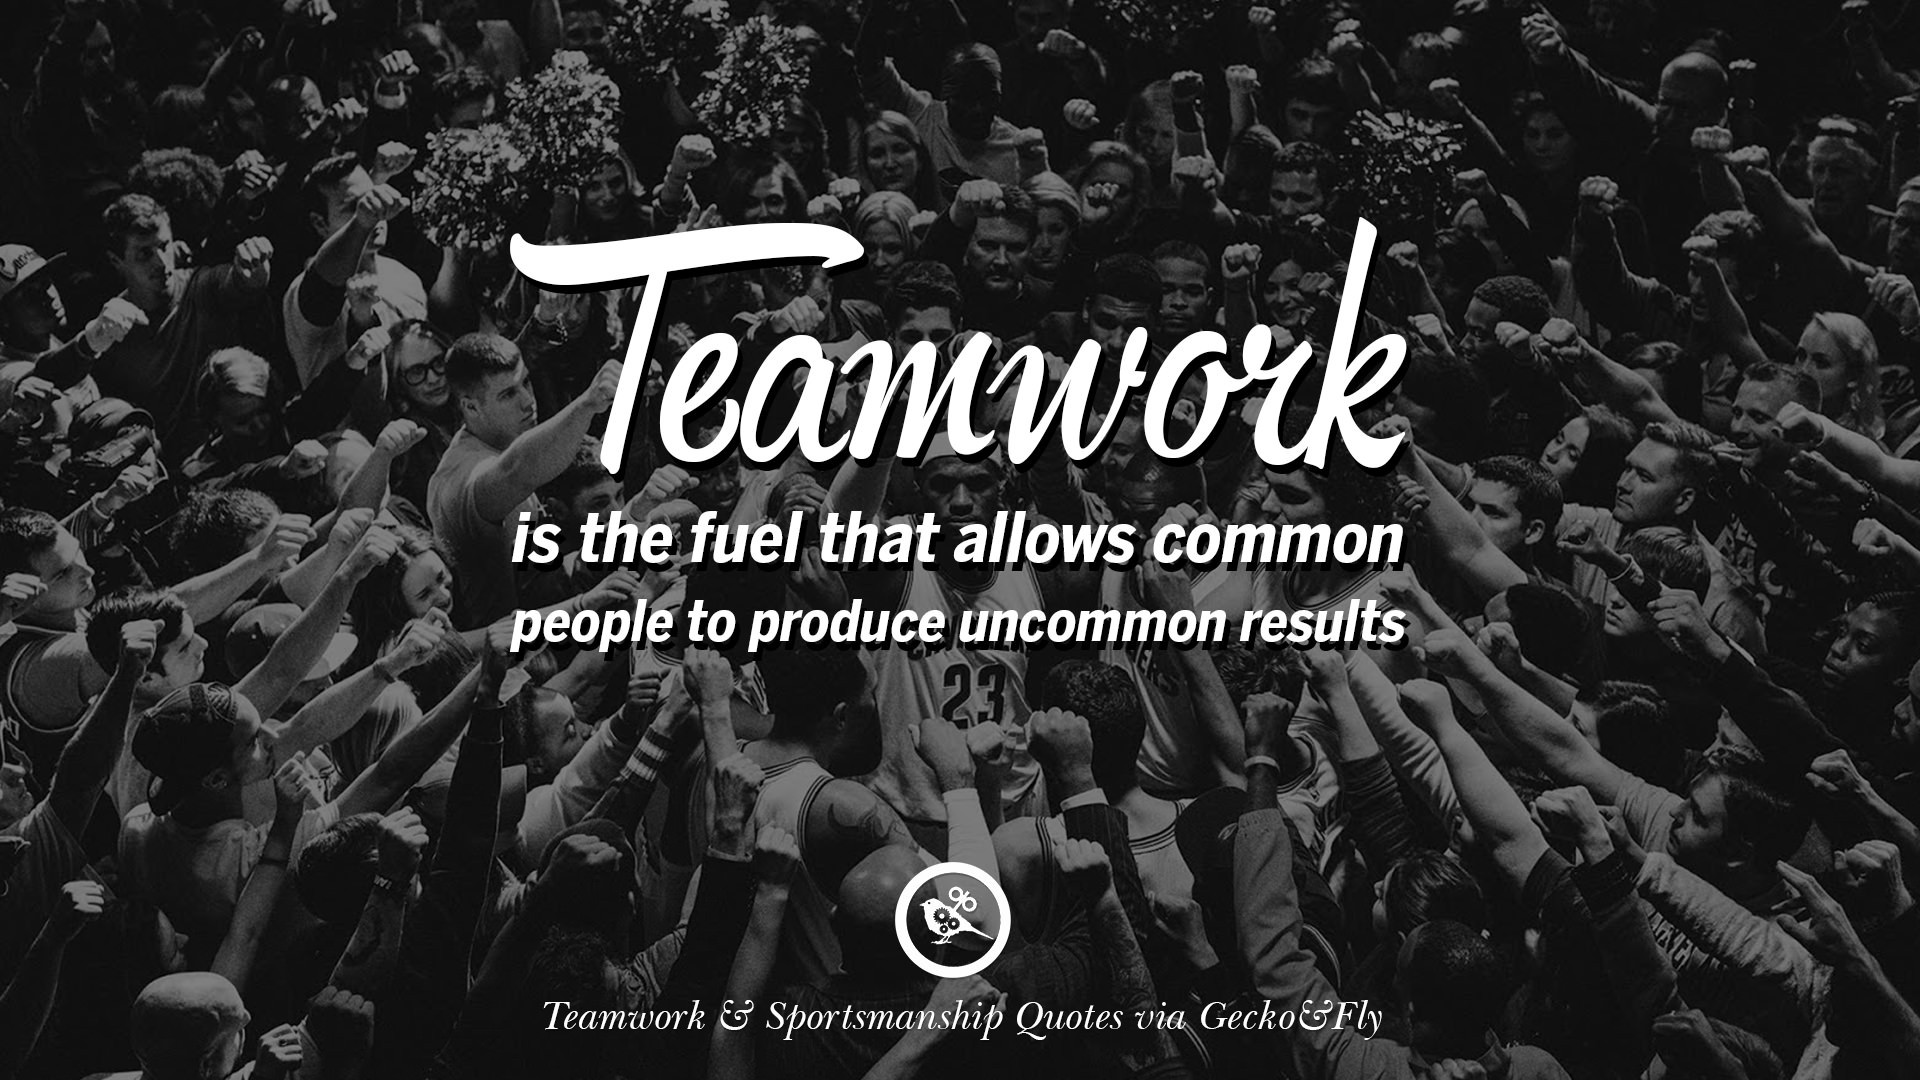 Inspirational Quote For Teamwork
 50 Inspirational Quotes About Teamwork And Sportsmanship